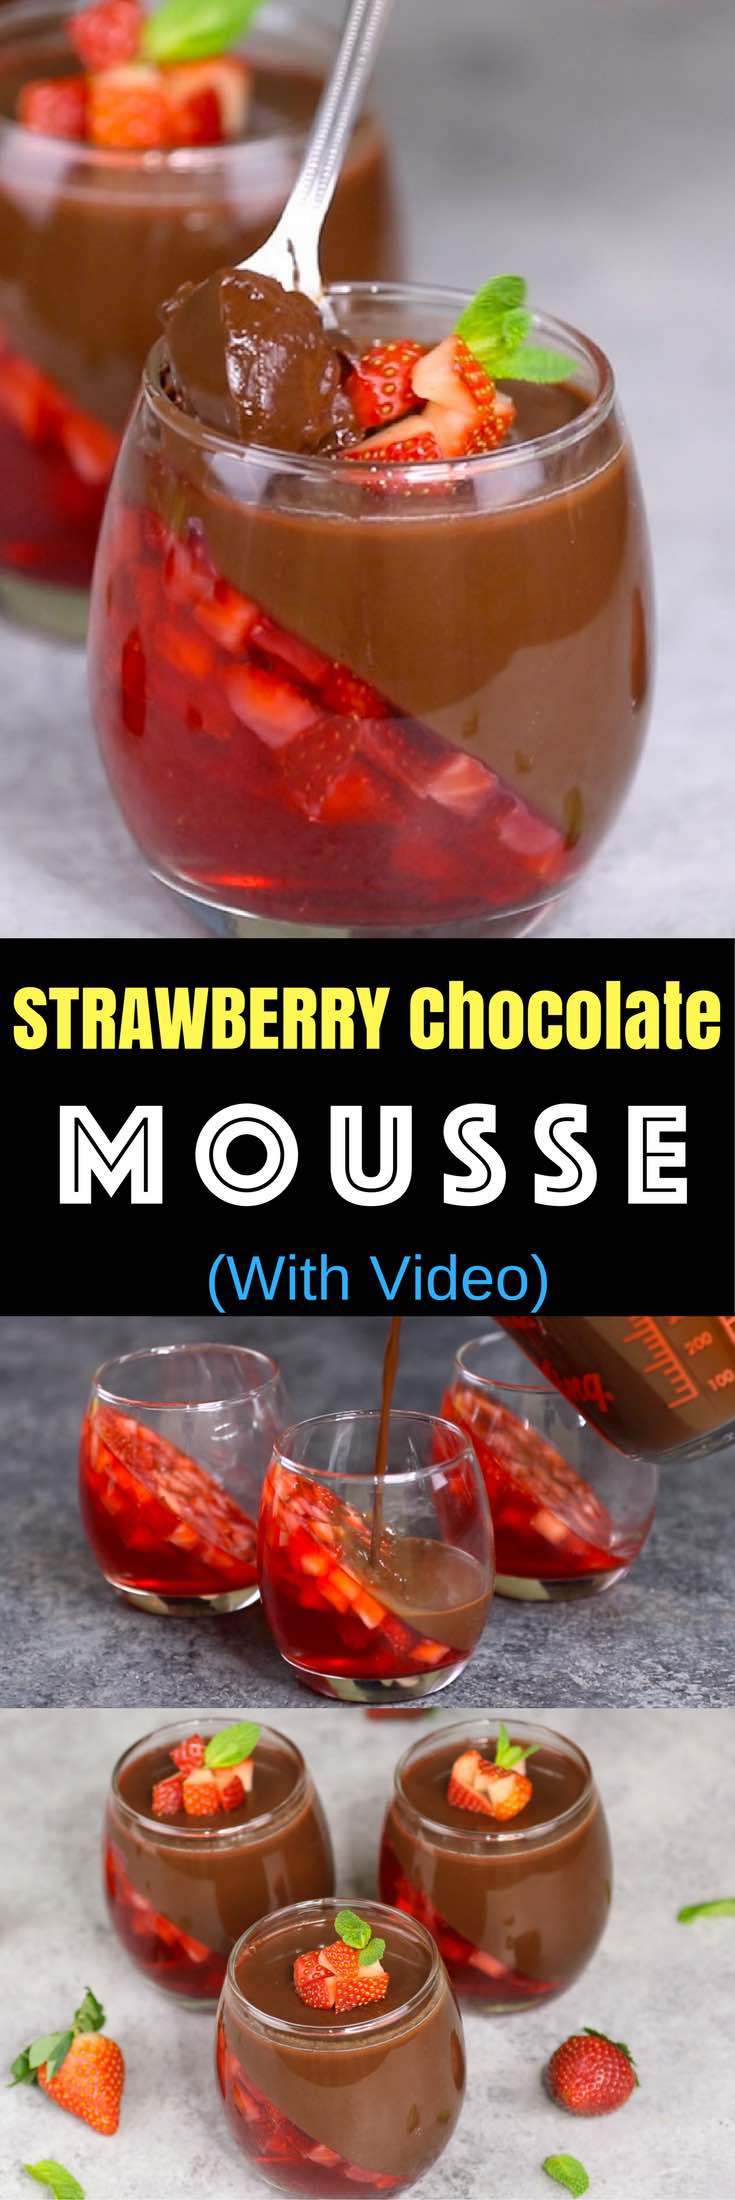 Strawberry Chocolate Mousse is a delicious make ahead dessert with two layers that you can easily prepare. All you need is a few simple ingredients: fresh strawberries, strawberry jello powder, water, cocoa, sugar, half and half milk and unflavored gelatin. Make this for Valentine's Day, birthdays, Mother's Day, holidays and date night. Make ahead recipe, no bake, video recipe. tipbuzz.com